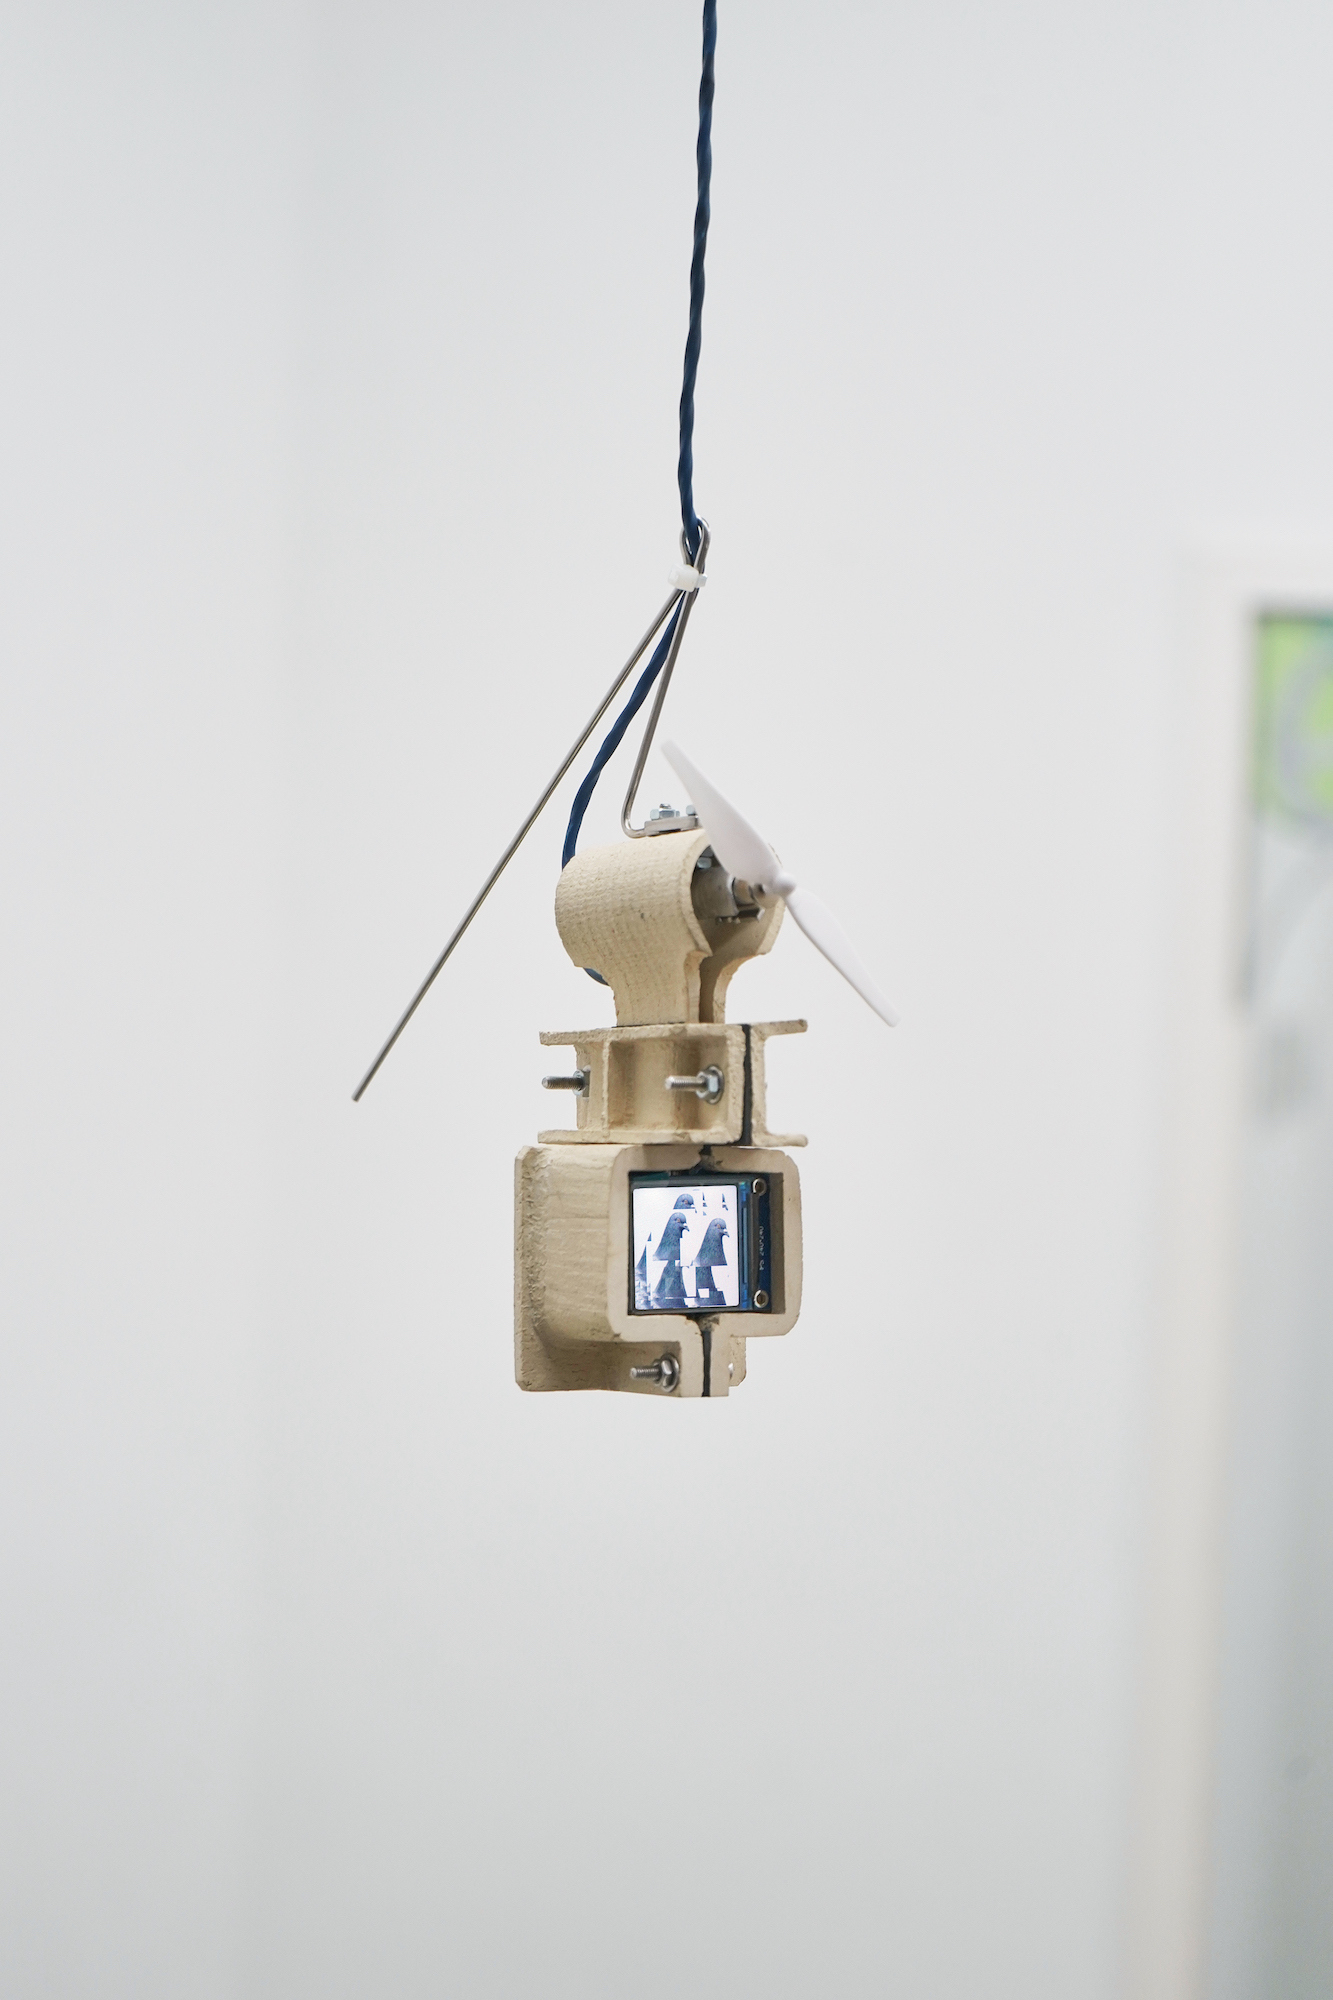 Younsik Kim, Untitled, 2023, Ceramic, stainless steel, LCD display, motor, abs plastic, Arduino processor Variable dimensions ( Three piece object )